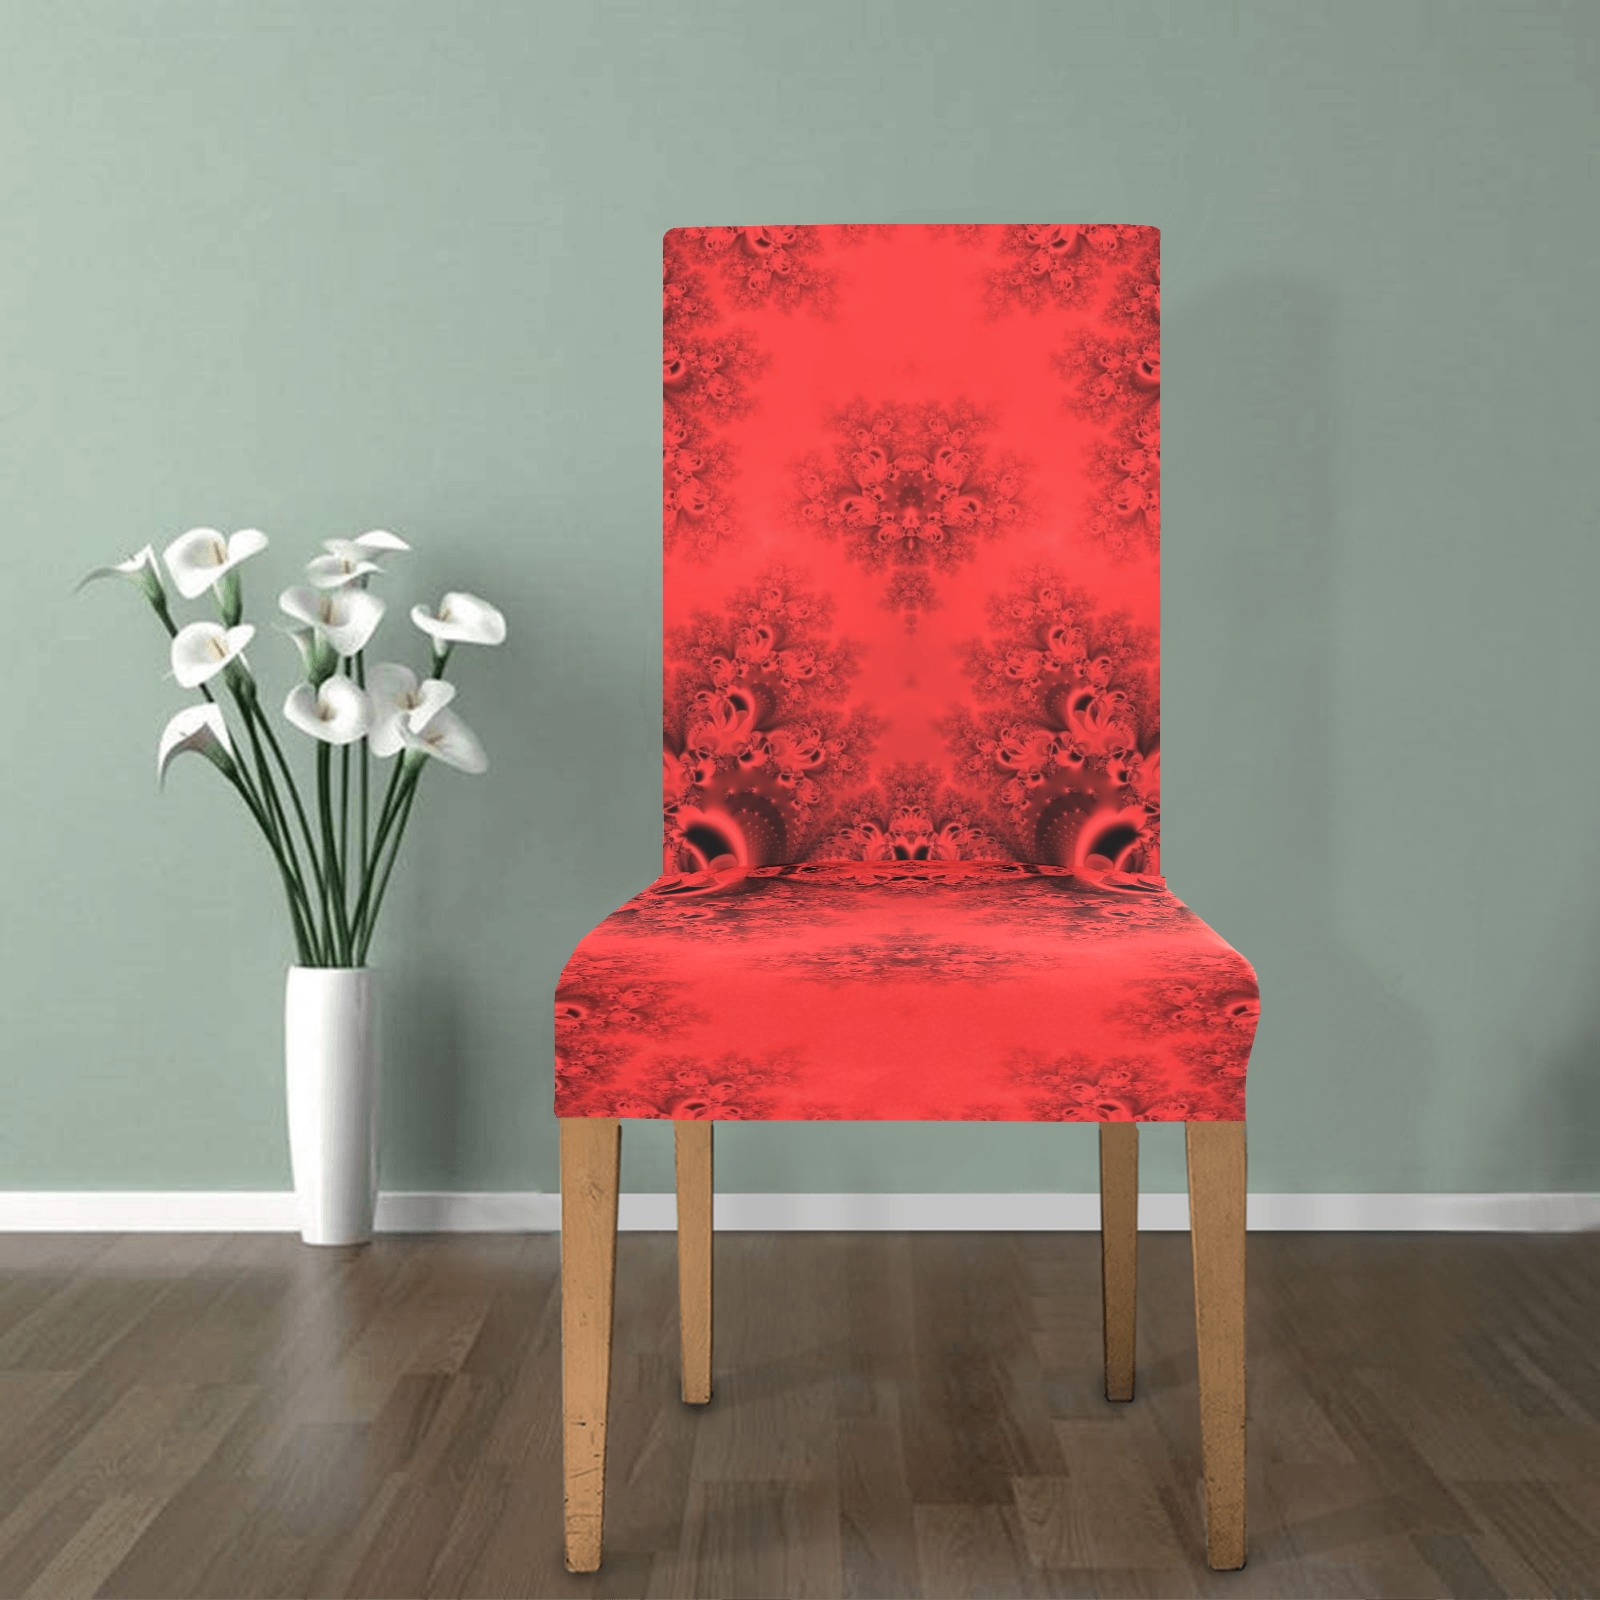 Autumn Reds in the Garden Frost Fractal Chair Cover (Pack of 4)